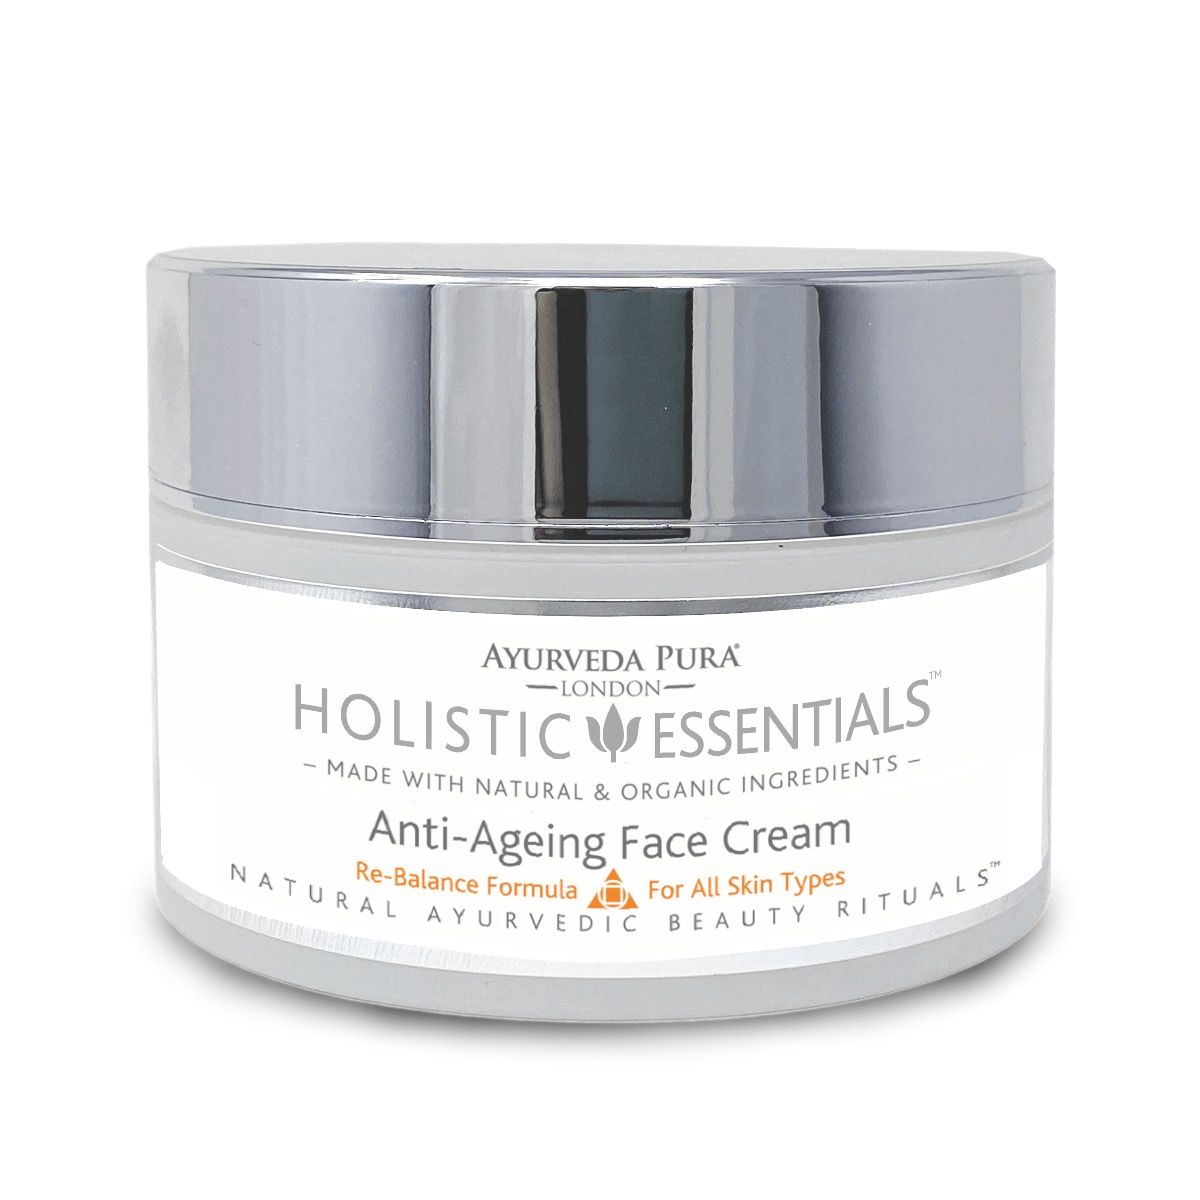 Anti-Aging Facial Cream - Re-Balance Formula - Made With Natural And Organic Ingredients 